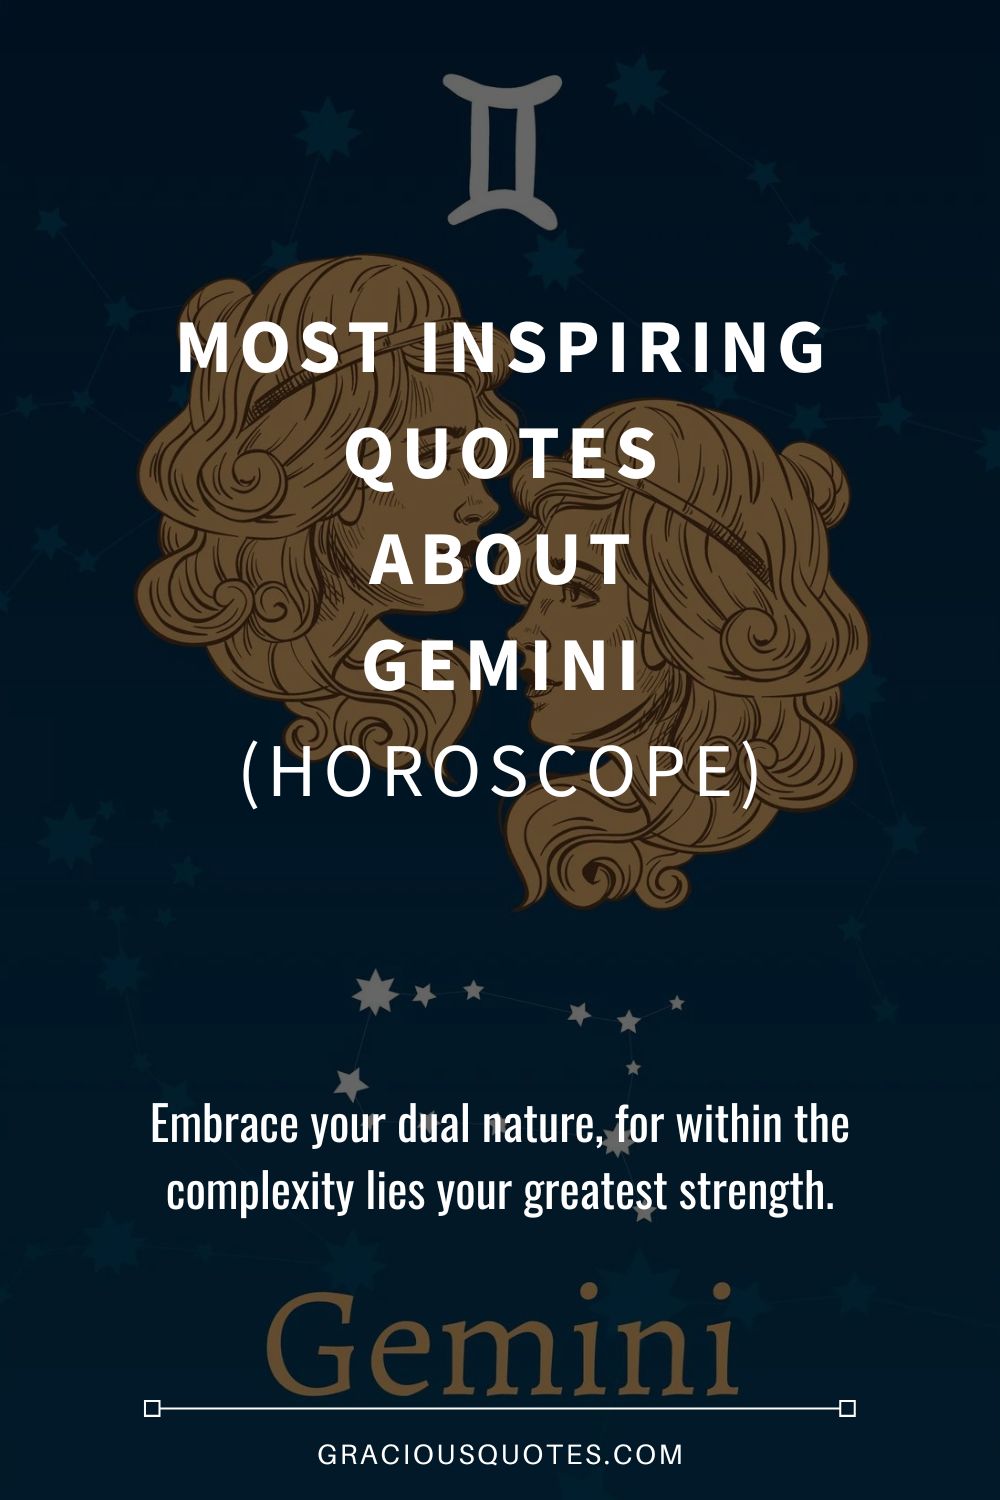 Most Inspiring Quotes About Gemini (HOROSCOPE) - Gracious Quotes